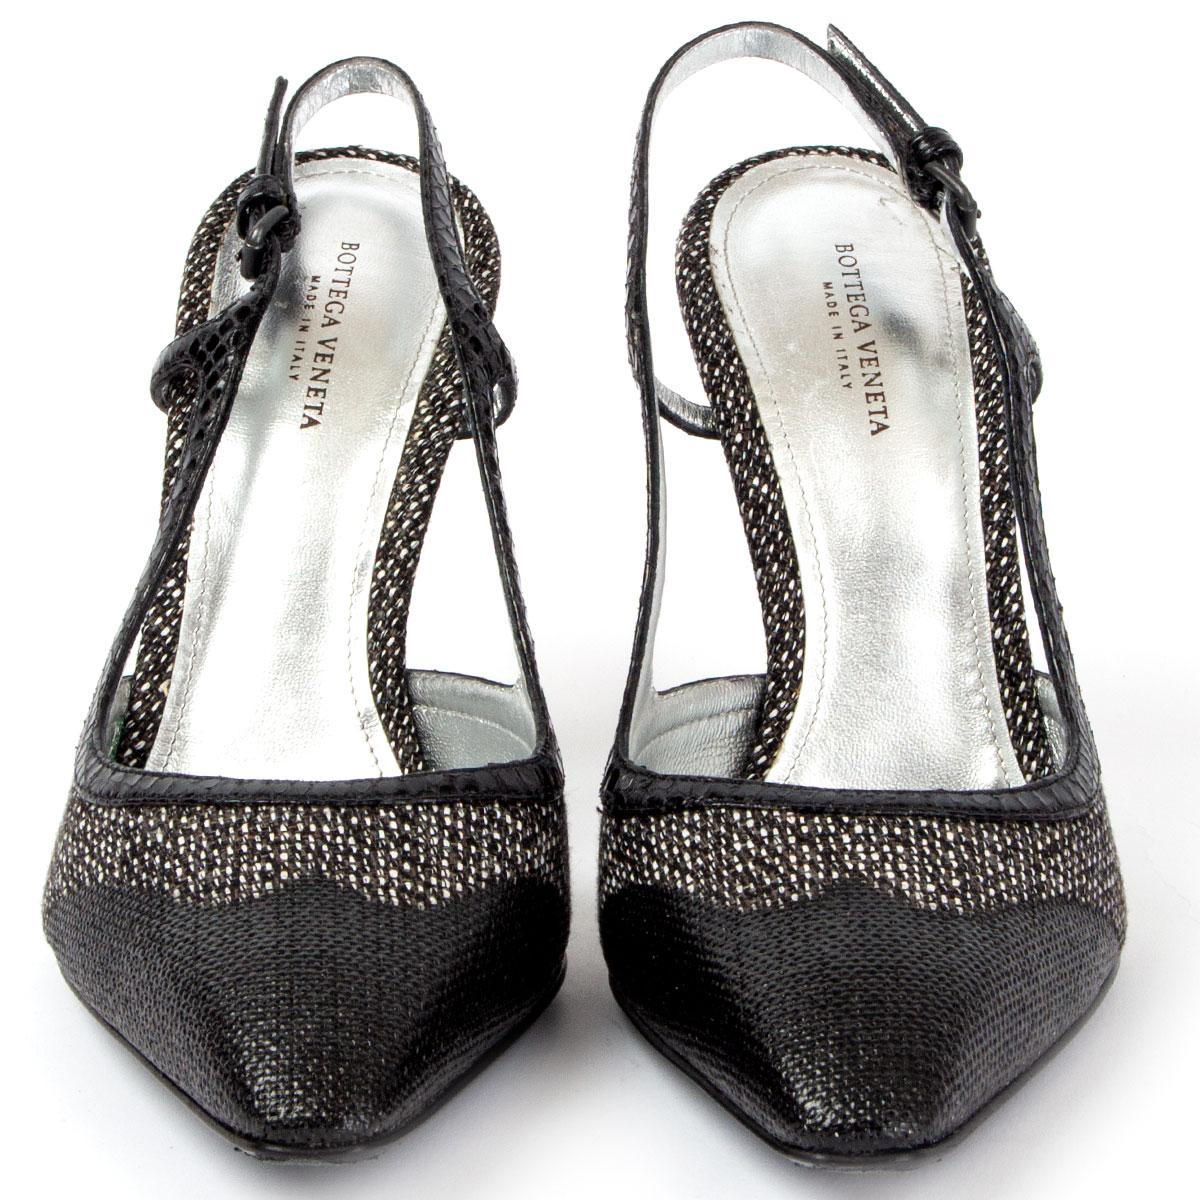 100% authentic Bottega Veneta slingback pumps in black, grey and off-white canvas with a black coated tip featuring a black python heel. Have been worn and are in excellent condition. 

Imprinted Size	36.5
Shoe Size	36.5
Inside Sole	24.5cm